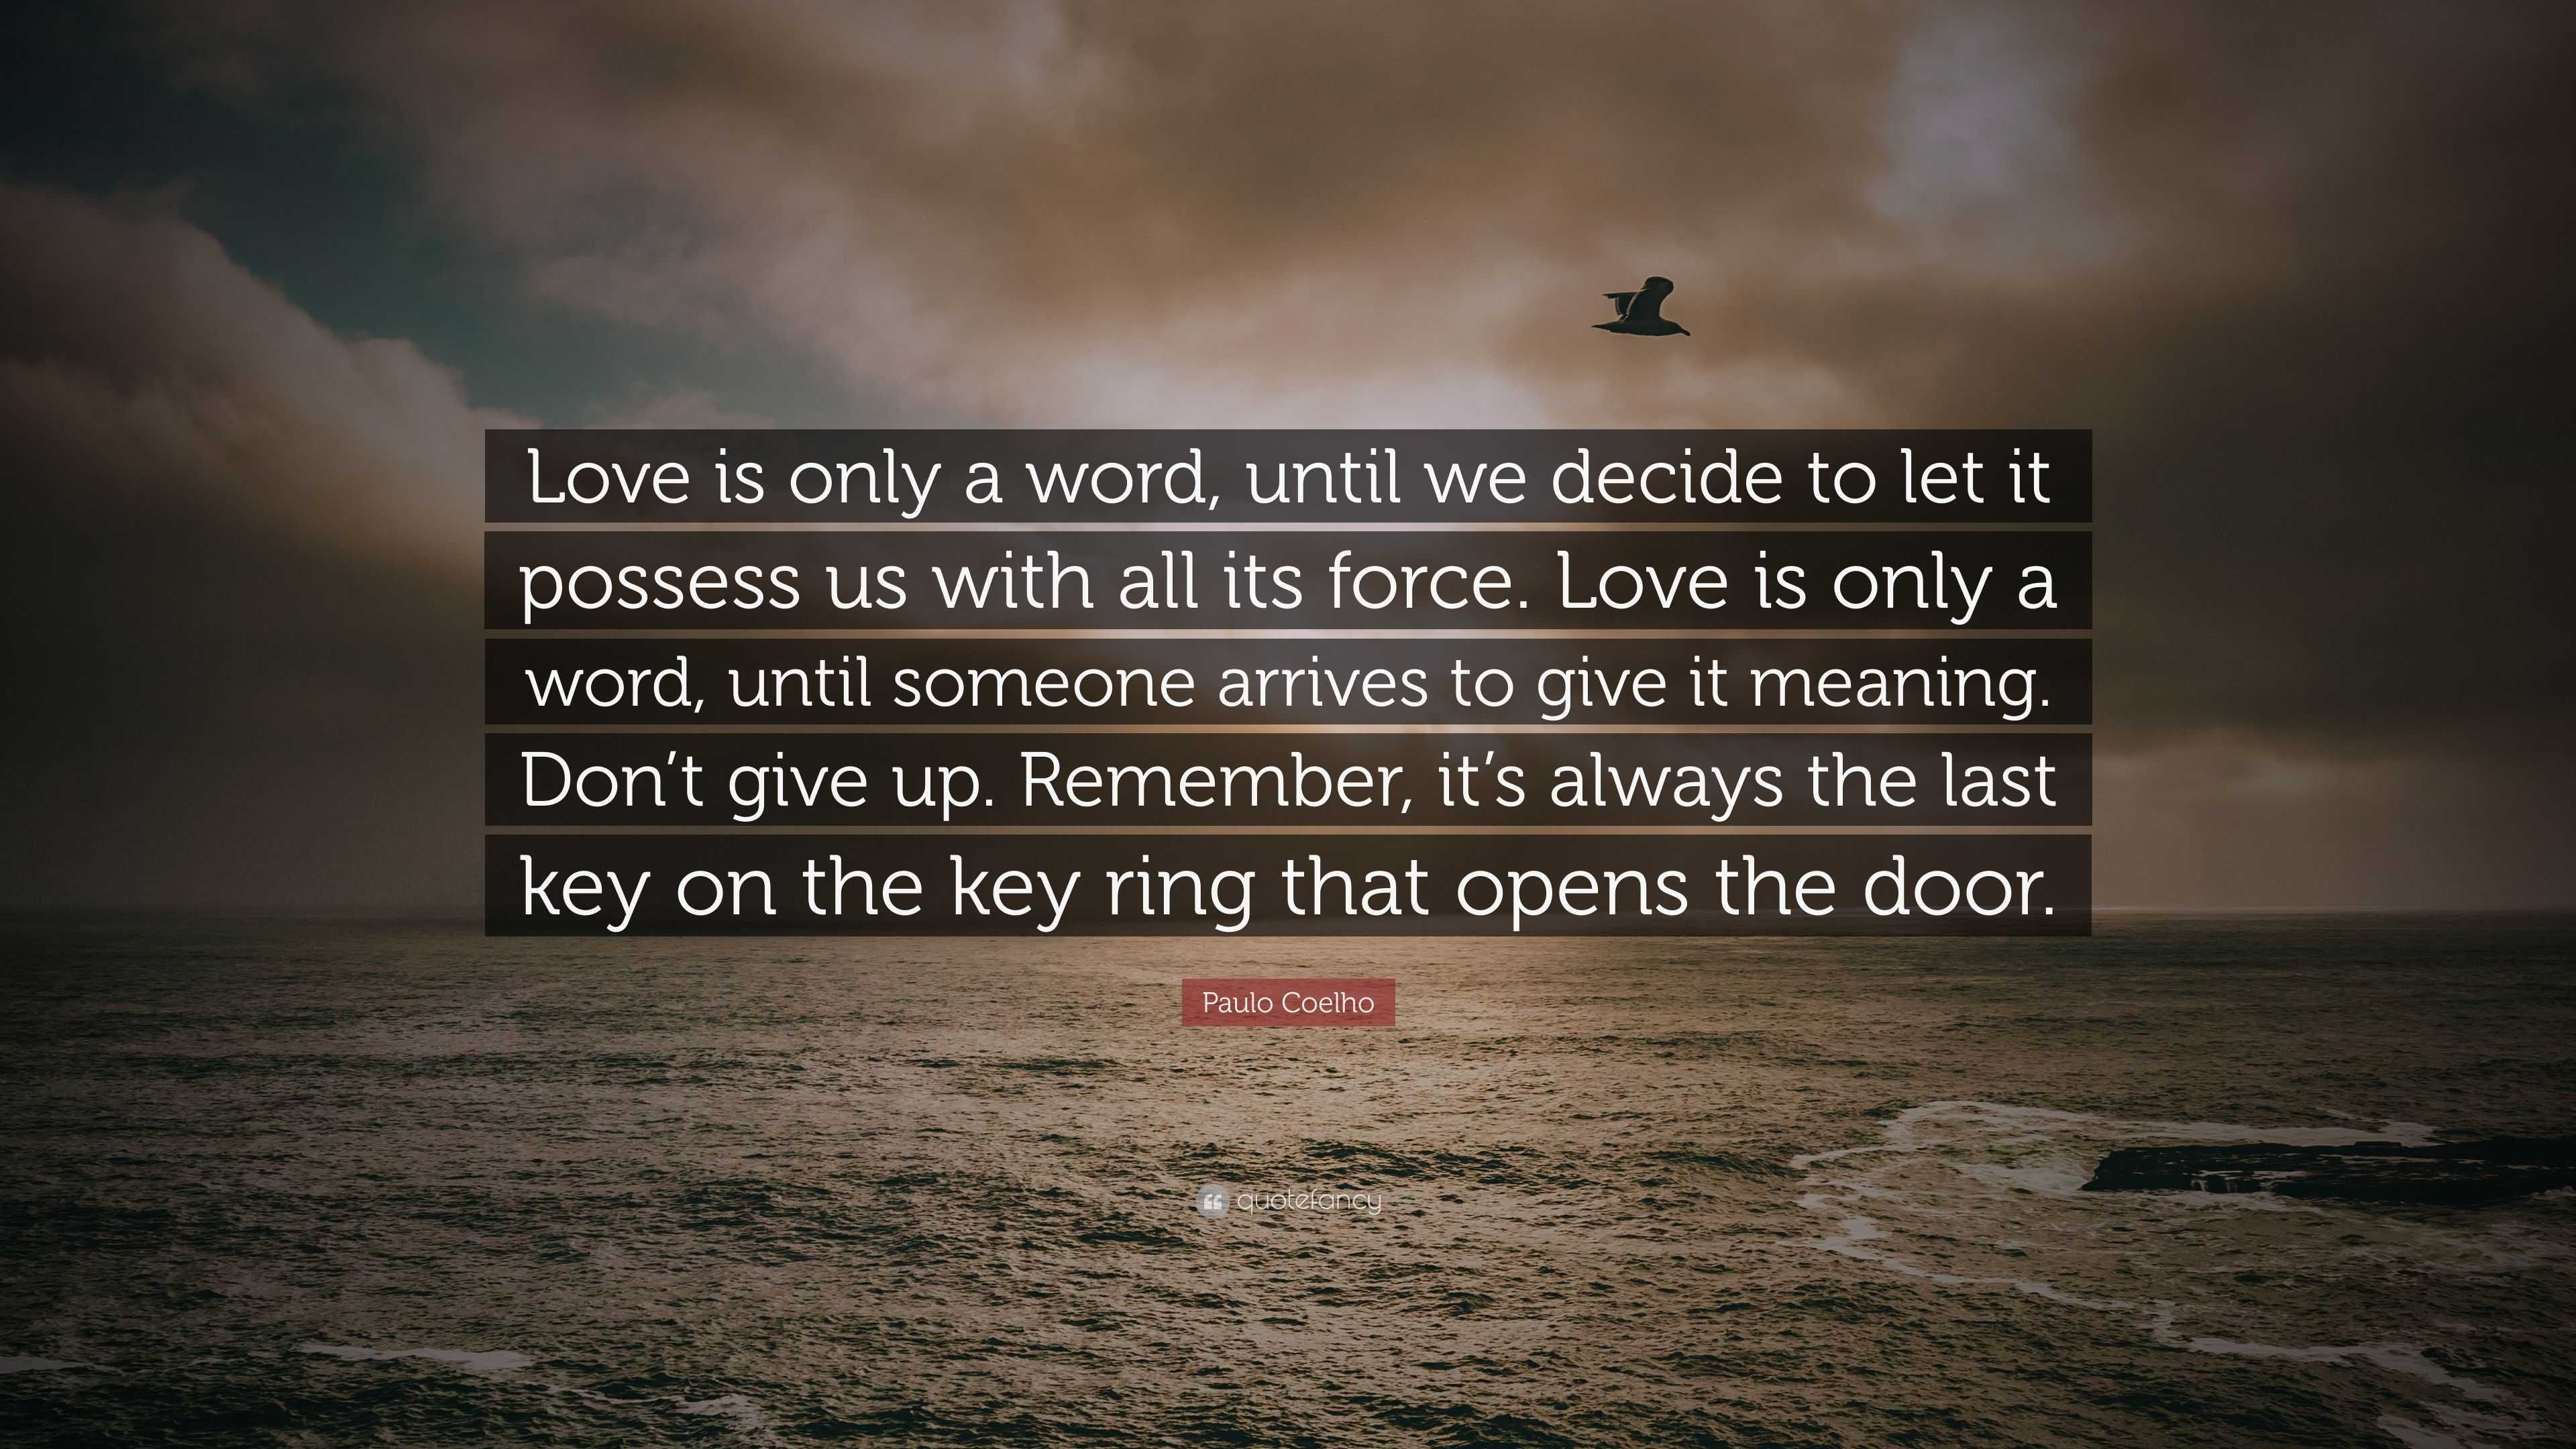 Paulo Coelho Quote “Love is only a word until we decide to let